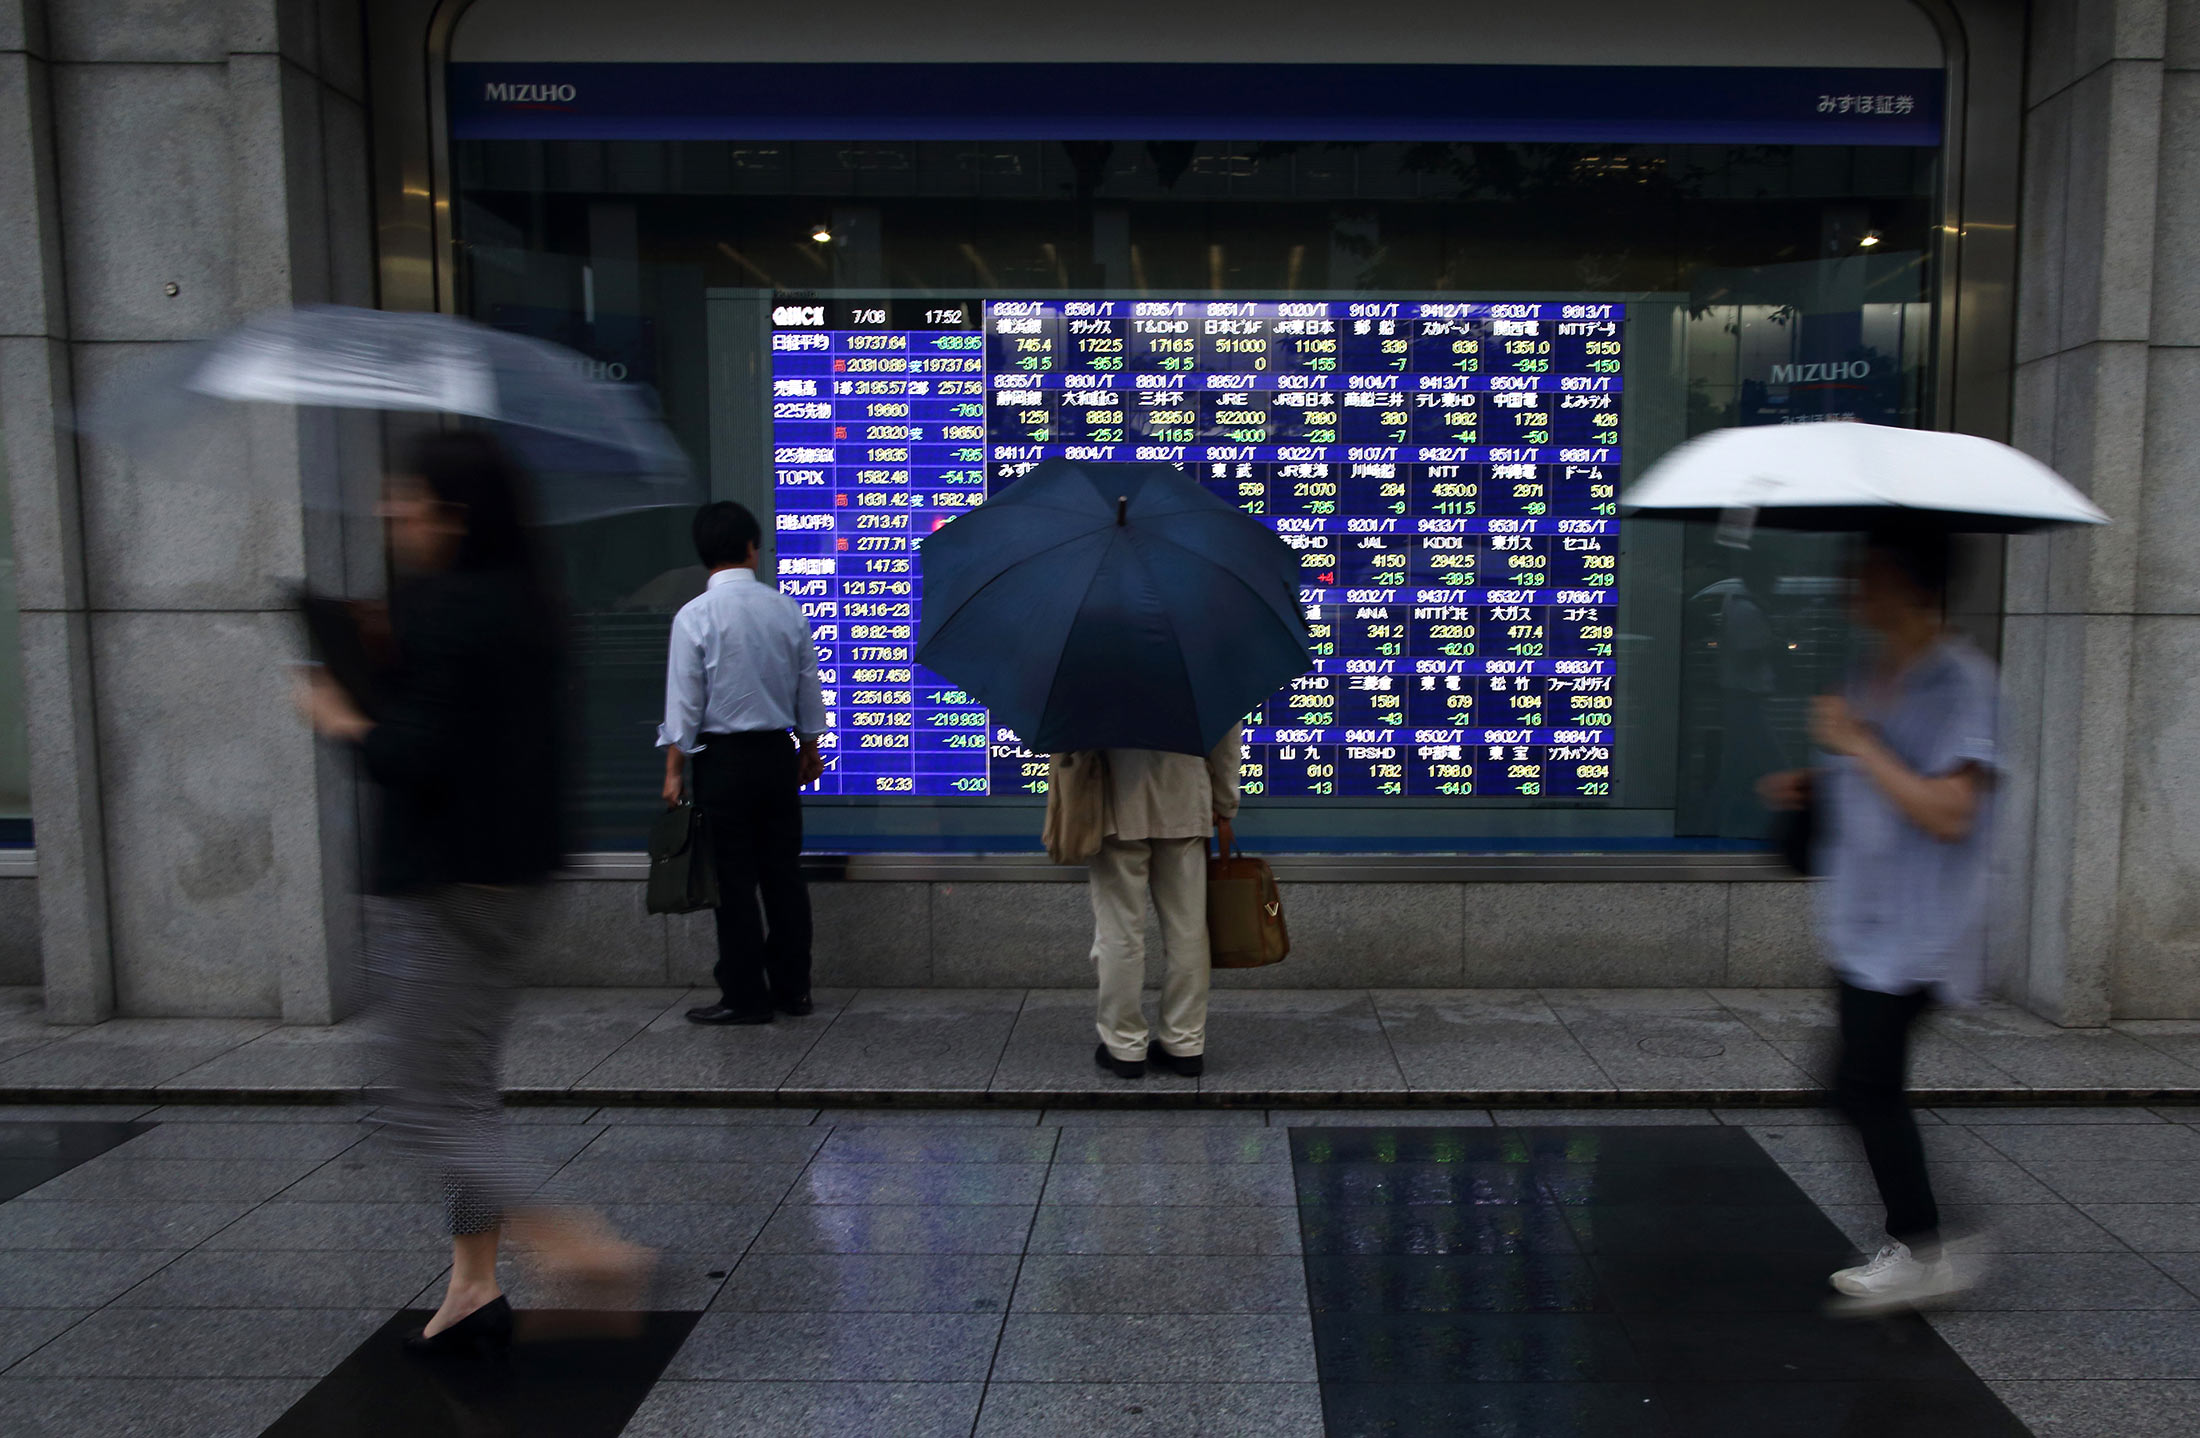 Pedestrians holding umbrellas walk past an electronic stock board outside a securities firm in Tokyo, Japan, on Wednesday, July 8, 2015. Japanese stocks fell, with the Topix index dropping by the most in more than a year, amid concern that ChinaÕs equity rout is spreading.
